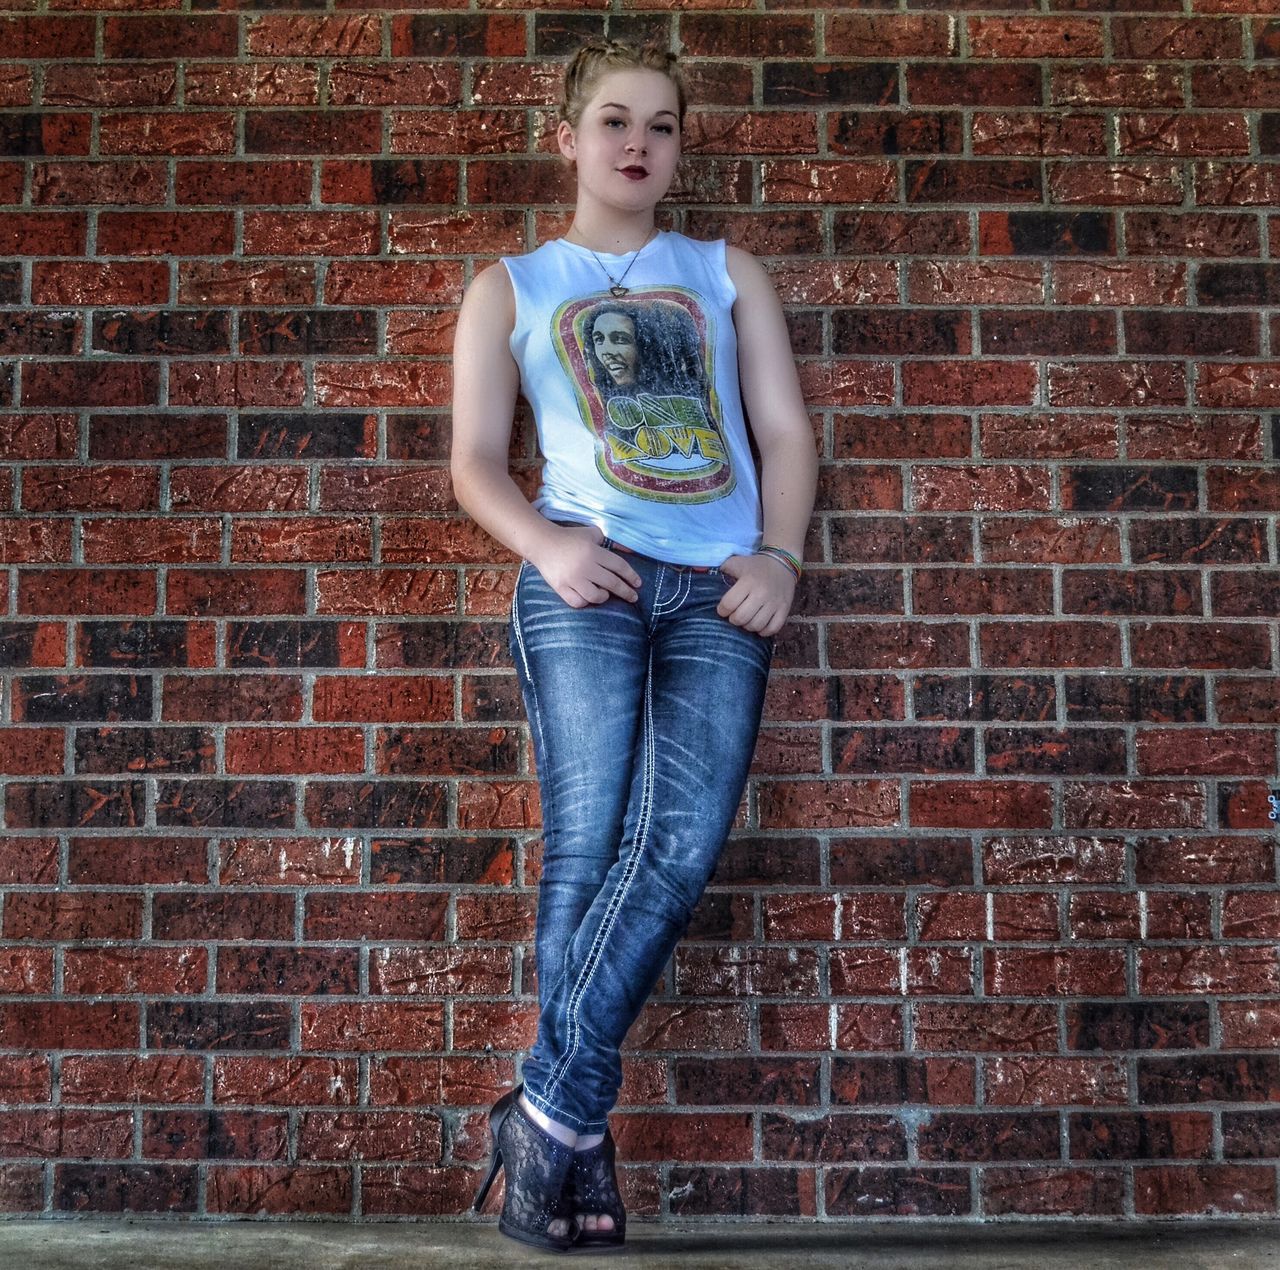 person, casual clothing, full length, front view, lifestyles, looking at camera, portrait, standing, brick wall, young adult, childhood, smiling, elementary age, leisure activity, happiness, wall - building feature, young women, three quarter length